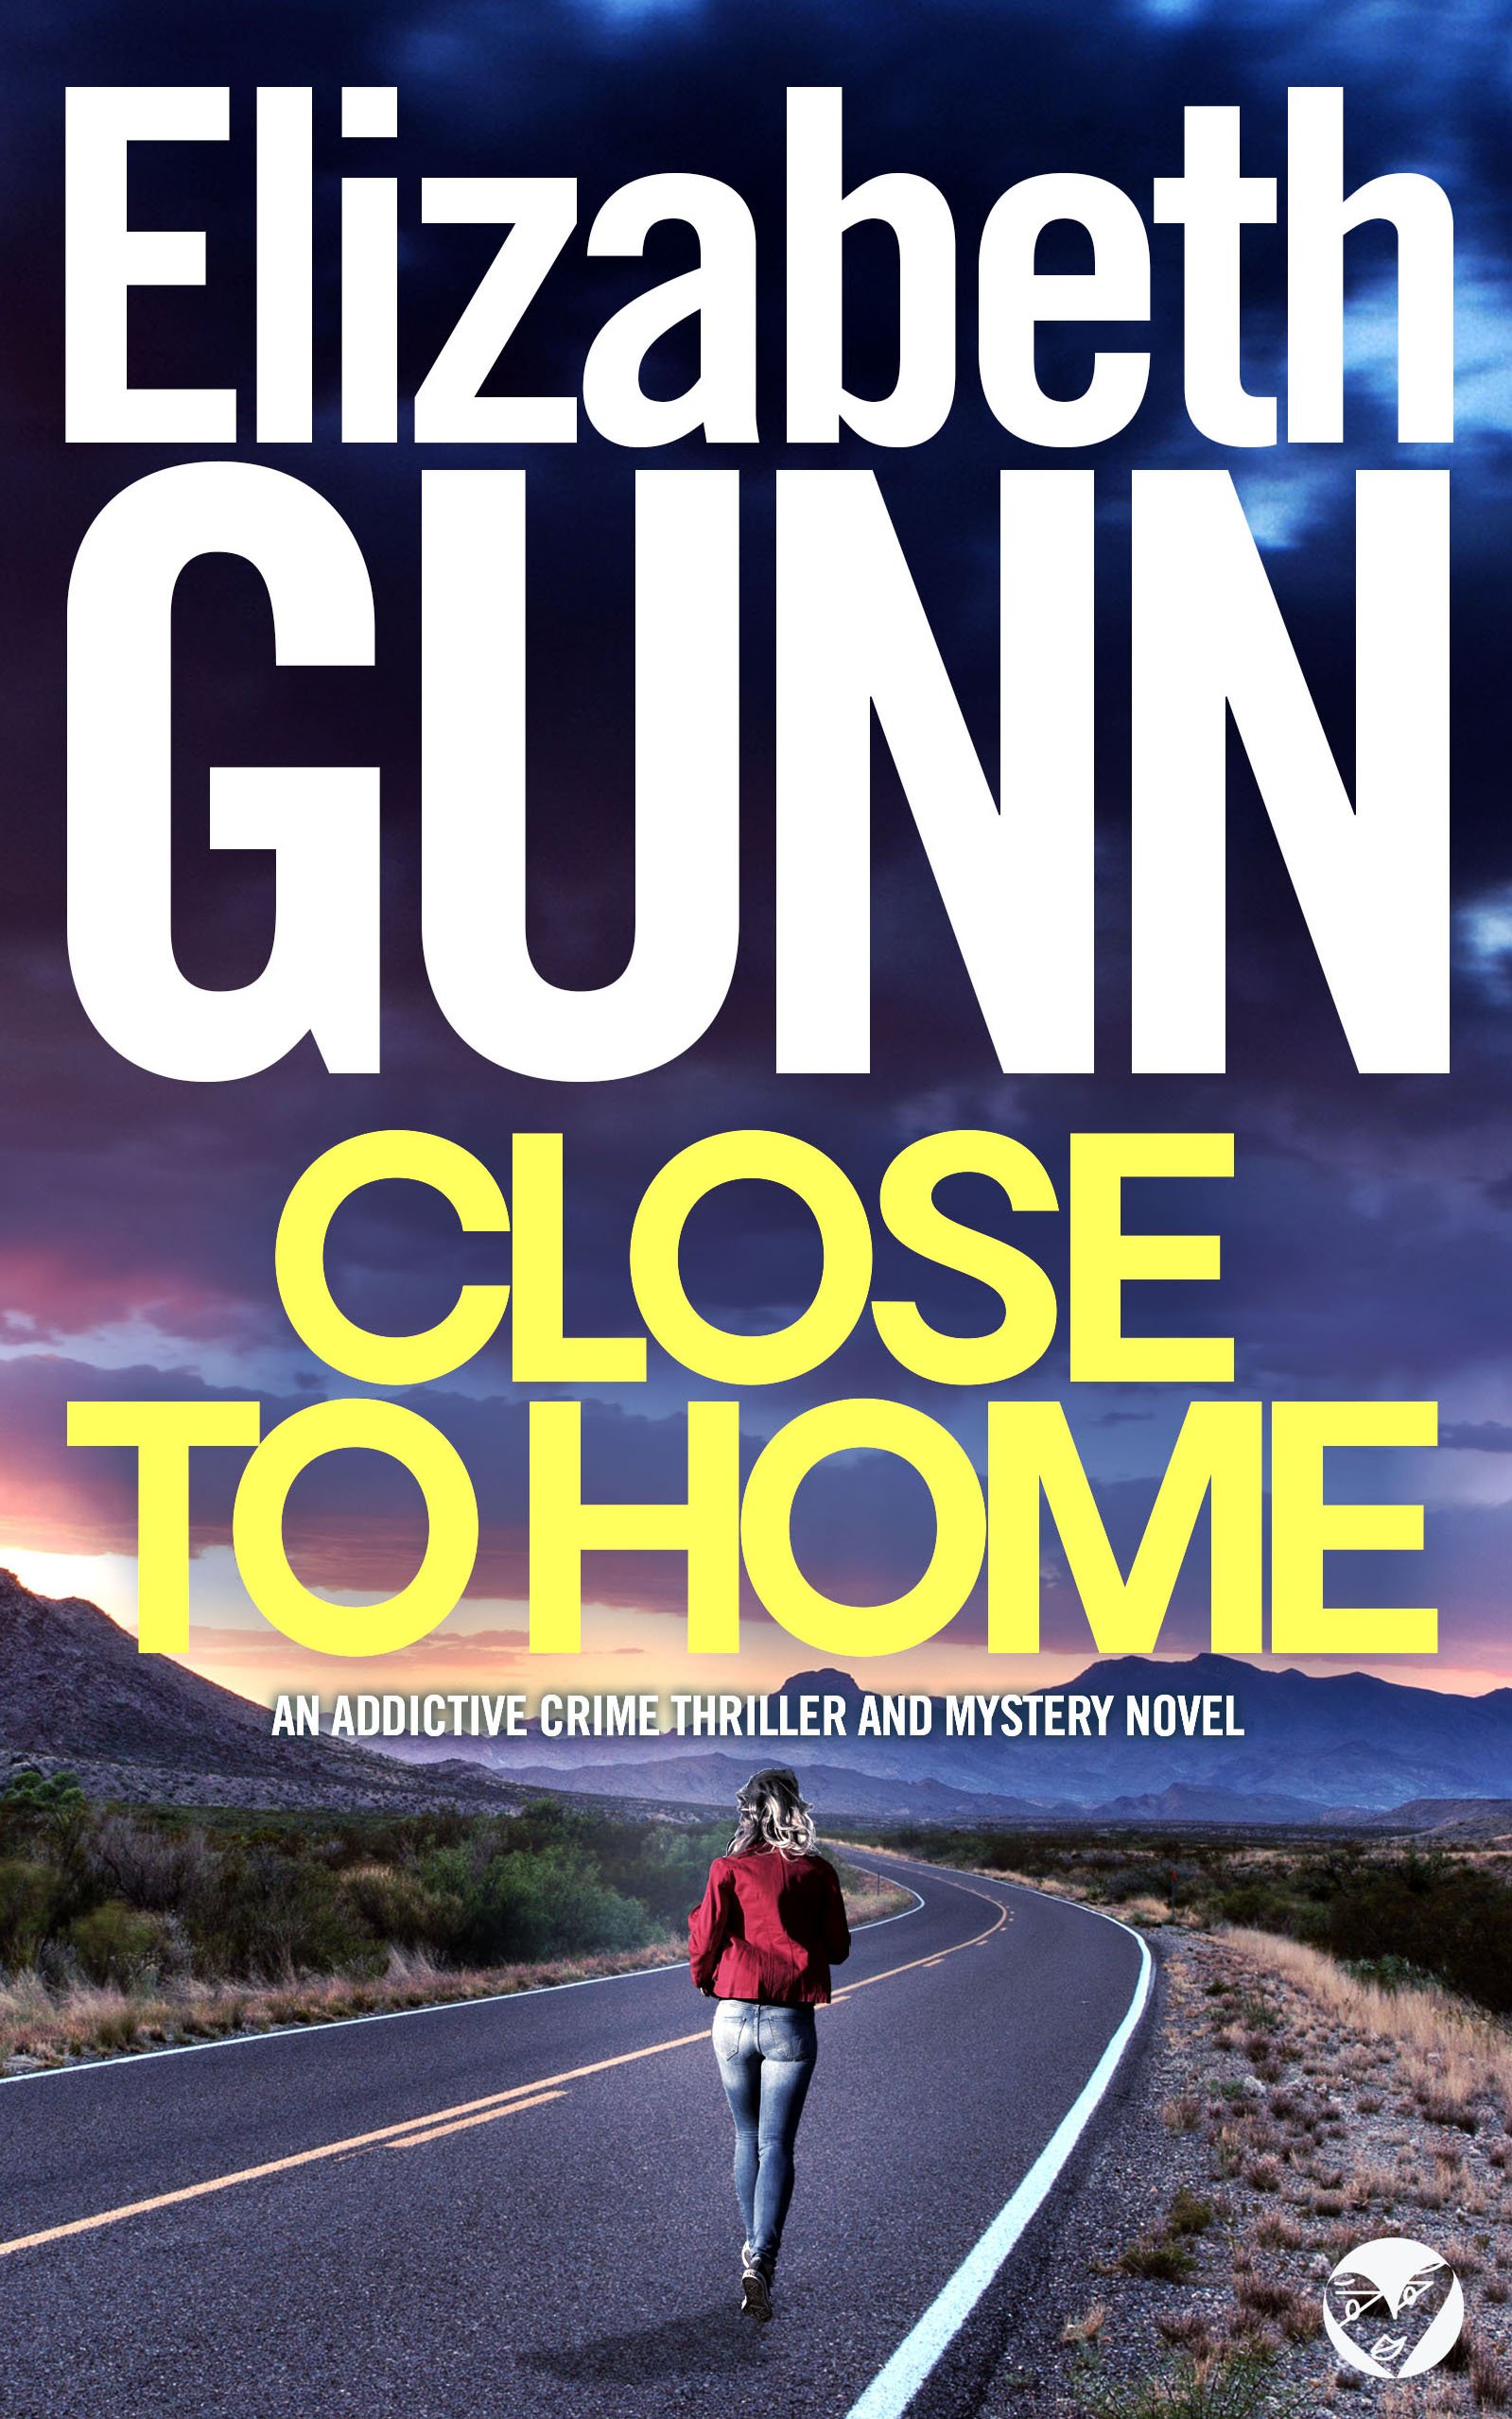 CLOSE TO HOME Cover publish.jpg